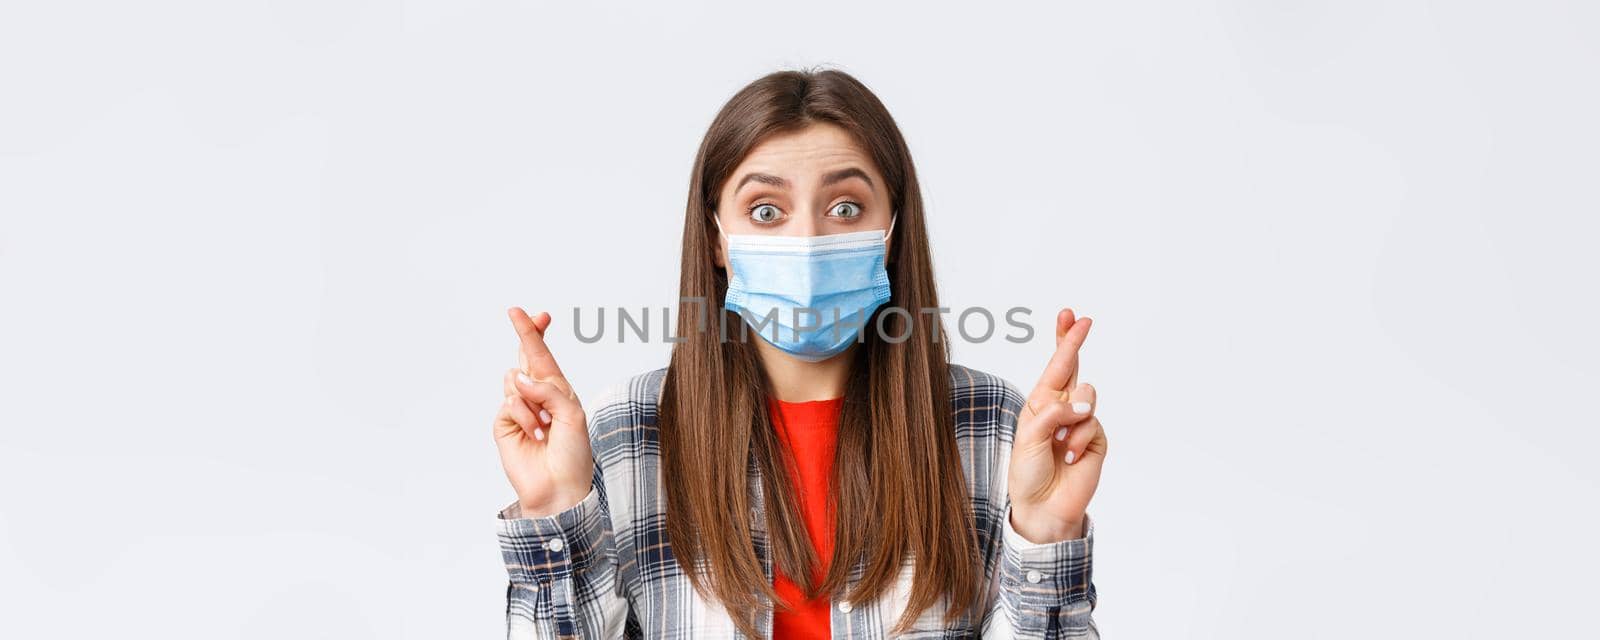 Coronavirus outbreak, leisure on quarantine, social distancing and emotions concept. Hopeful cute girl in medical mask anticipating good news, believe dream come true, cross fingers as making wish.